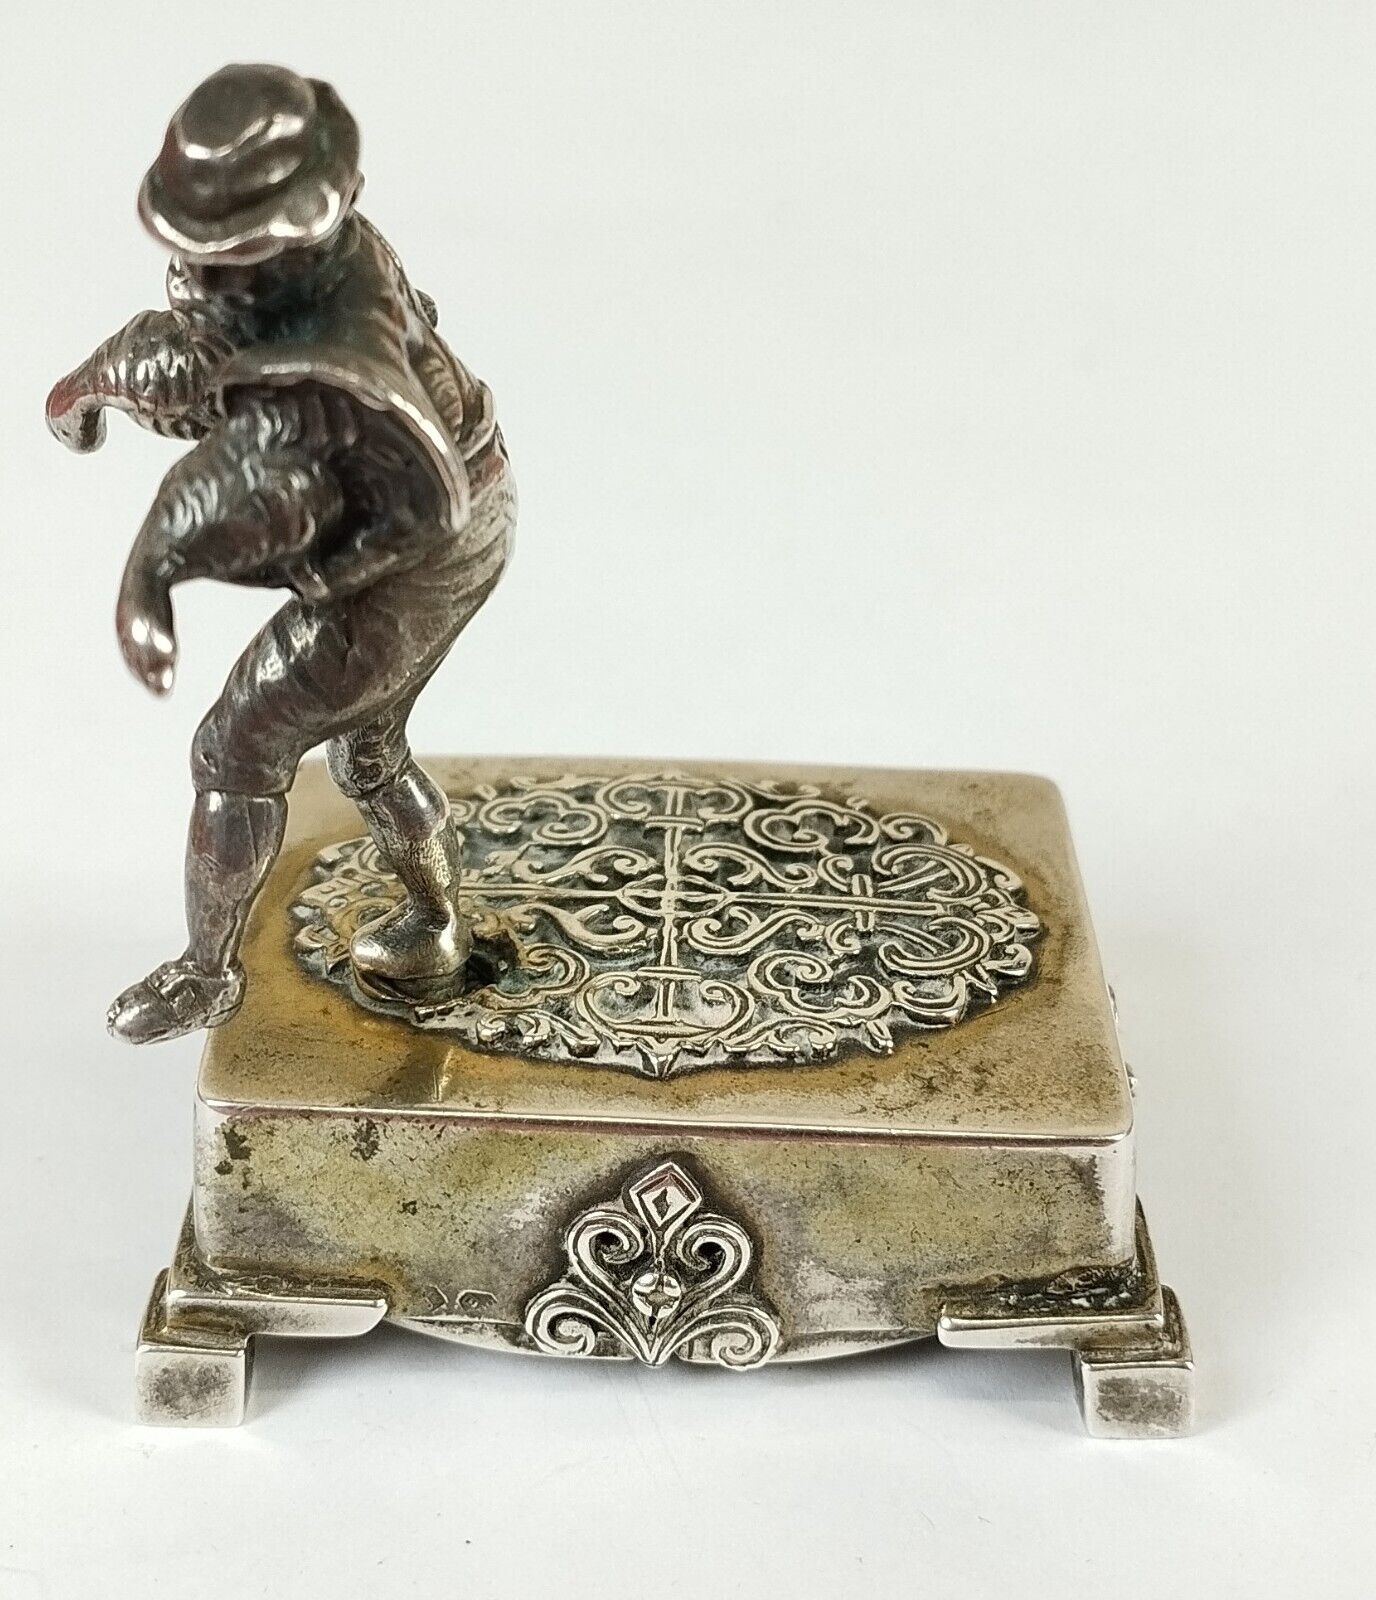 MUSIC BOX WITH AUTOMATON DANCING FIGURE. SILVER. EUROPE. 19TH-20TH CENTURY